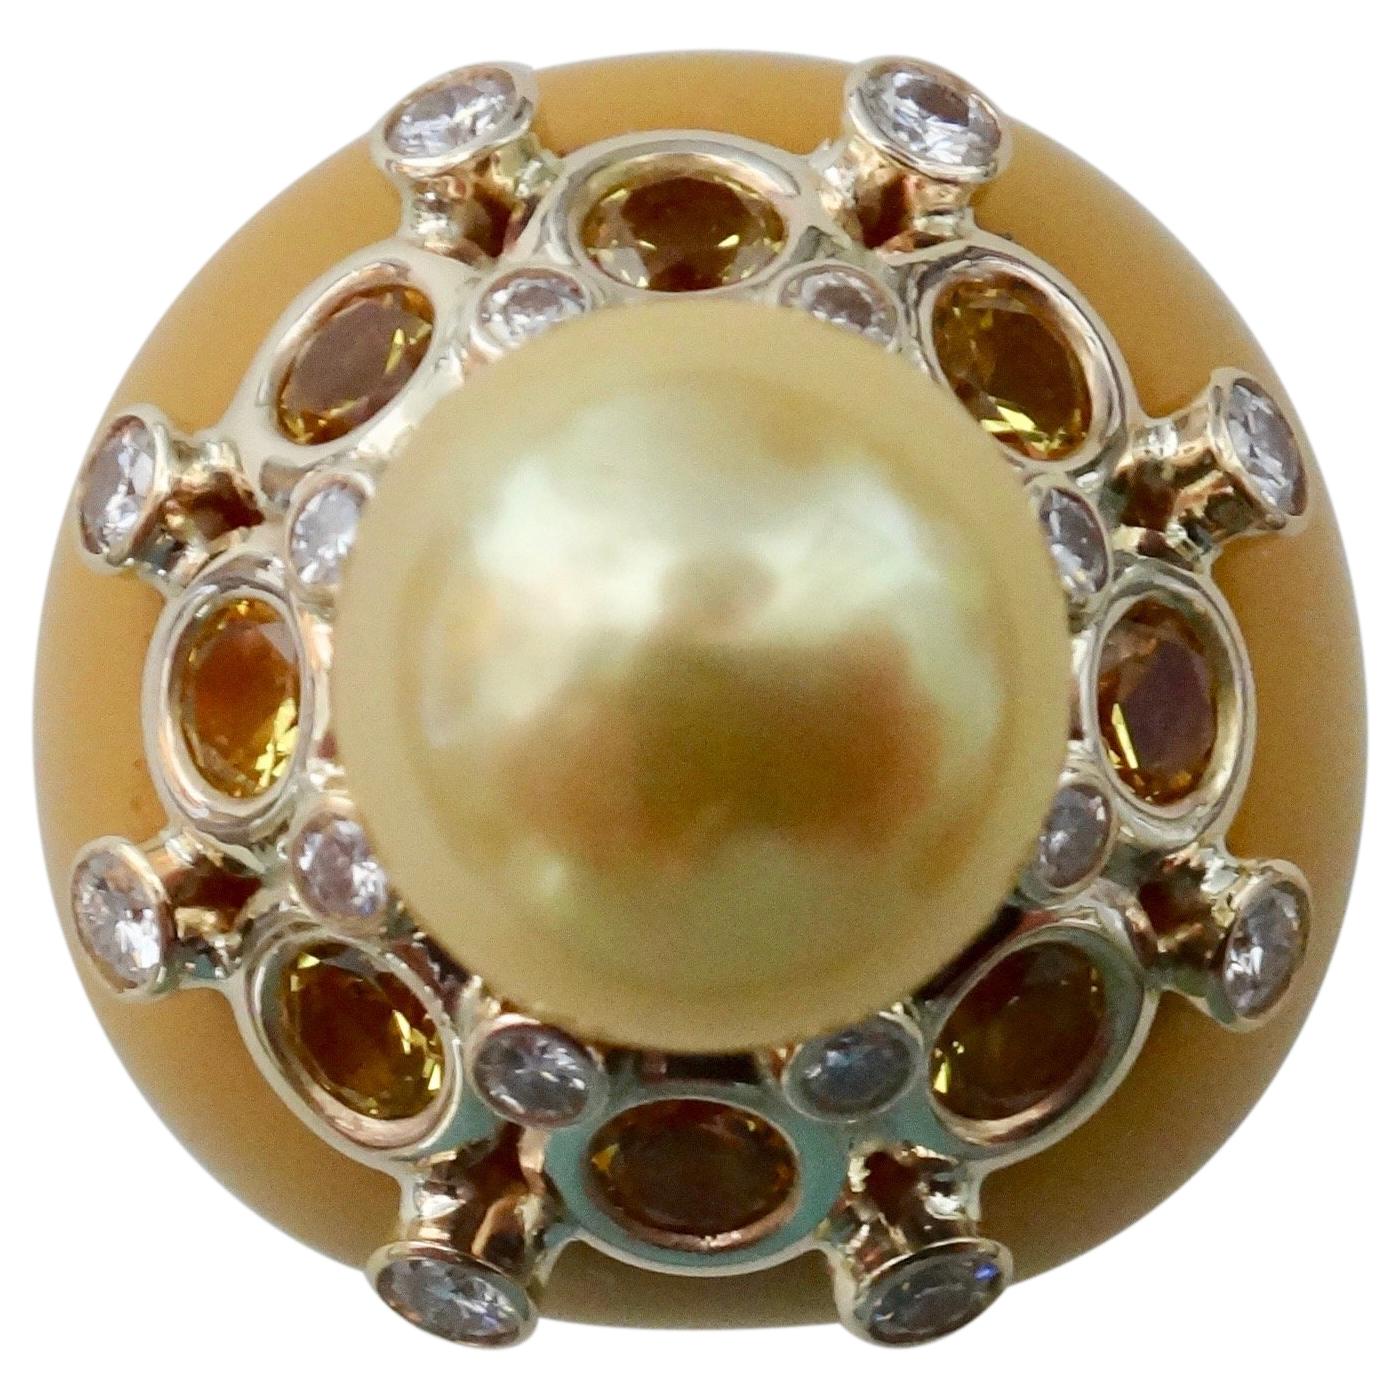 A vintage Bakelite dome ring forms the foundation of this dynamic cocktail ring.  The dome has been topped with a golden South Seas pearl (origin: Australia) which is surrounded by eight brilliant cut yellow sapphires (origin: Sri Lanka) and sixteen